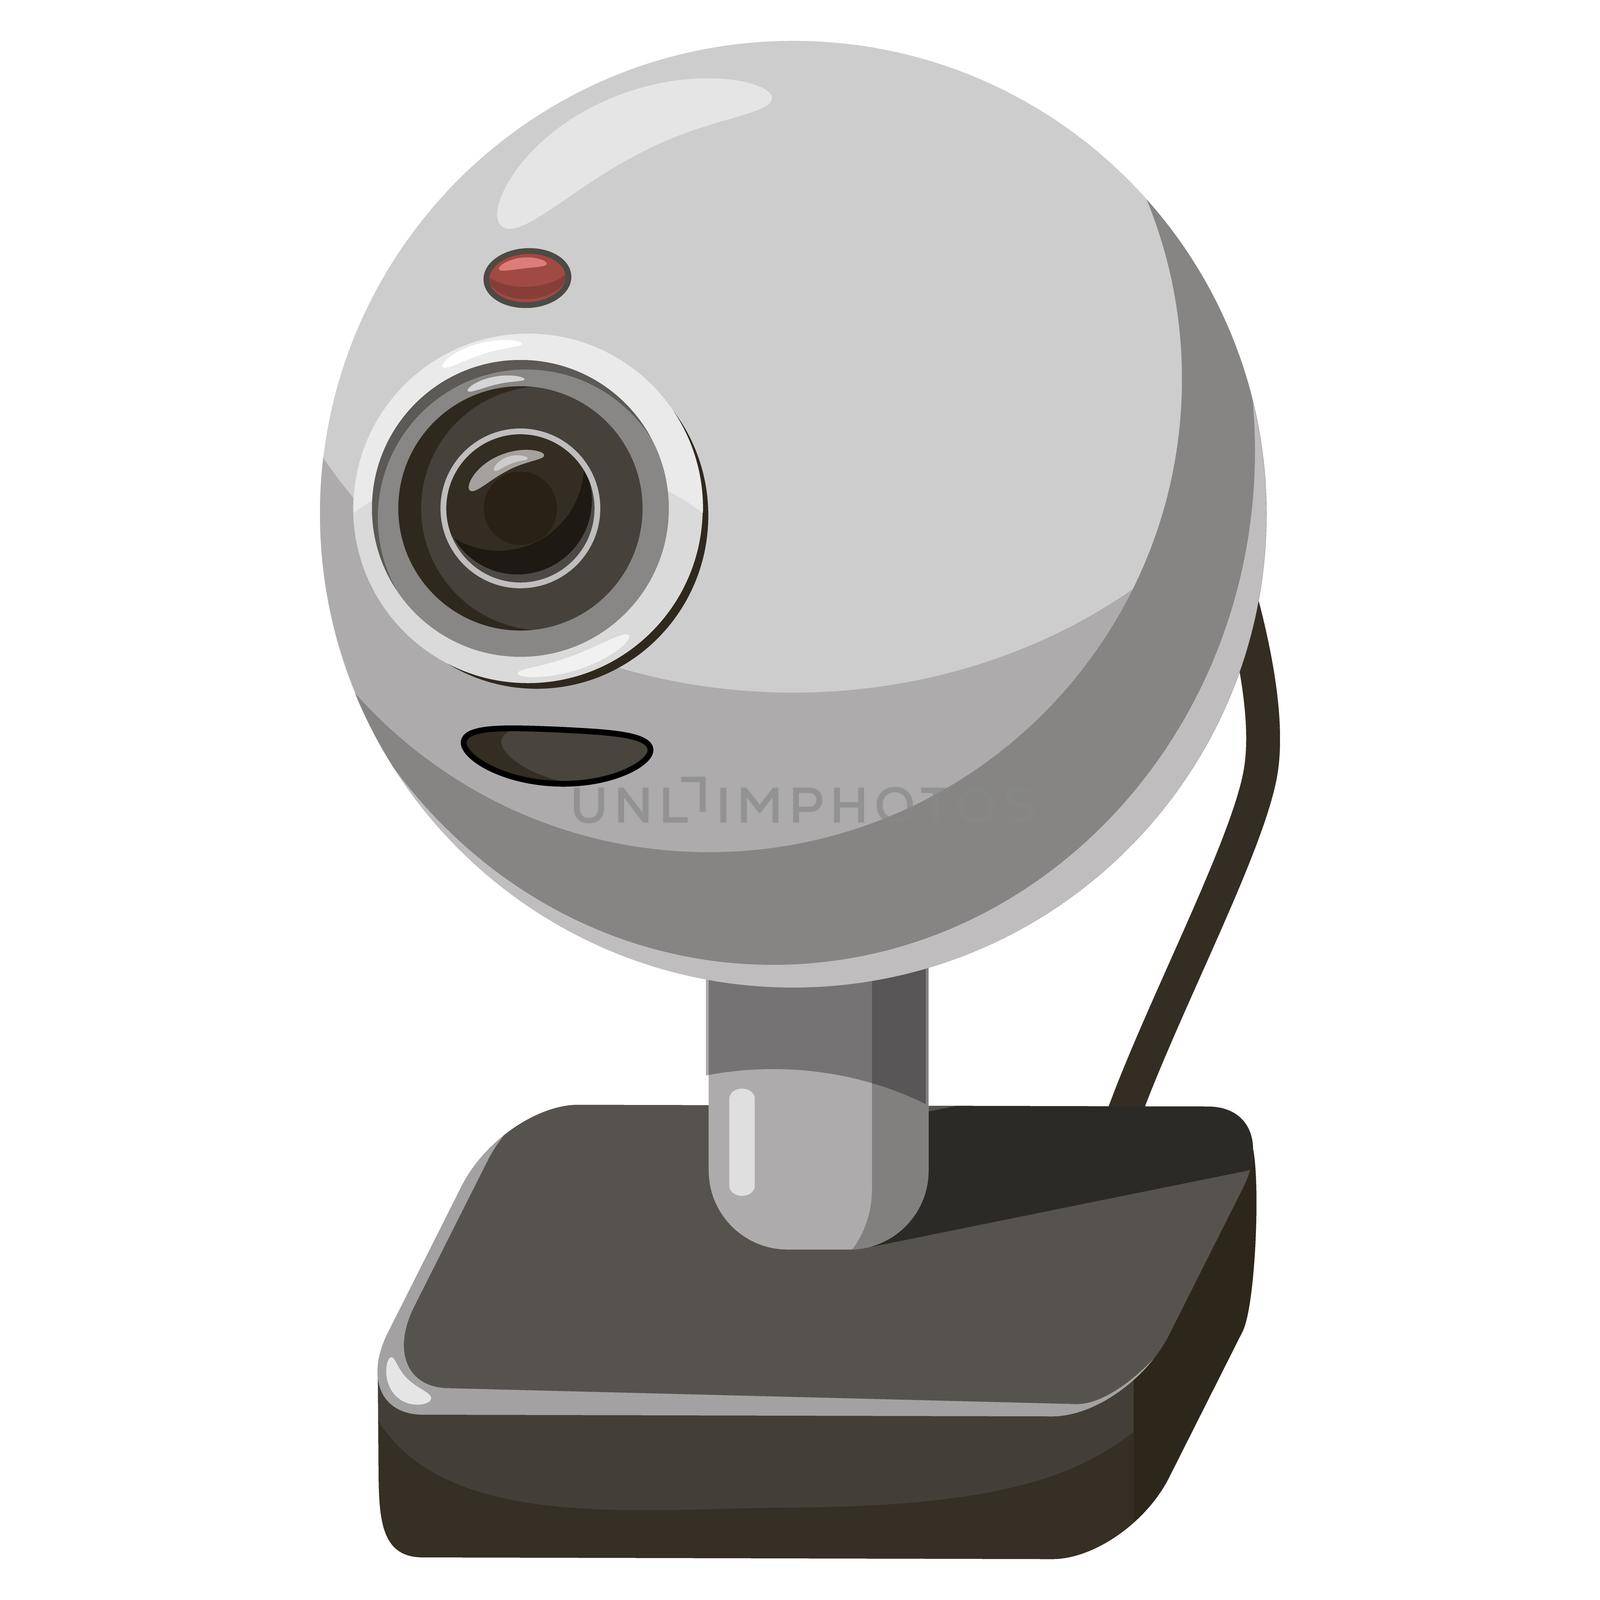 Webcam icon in cartoon style isolated on white background